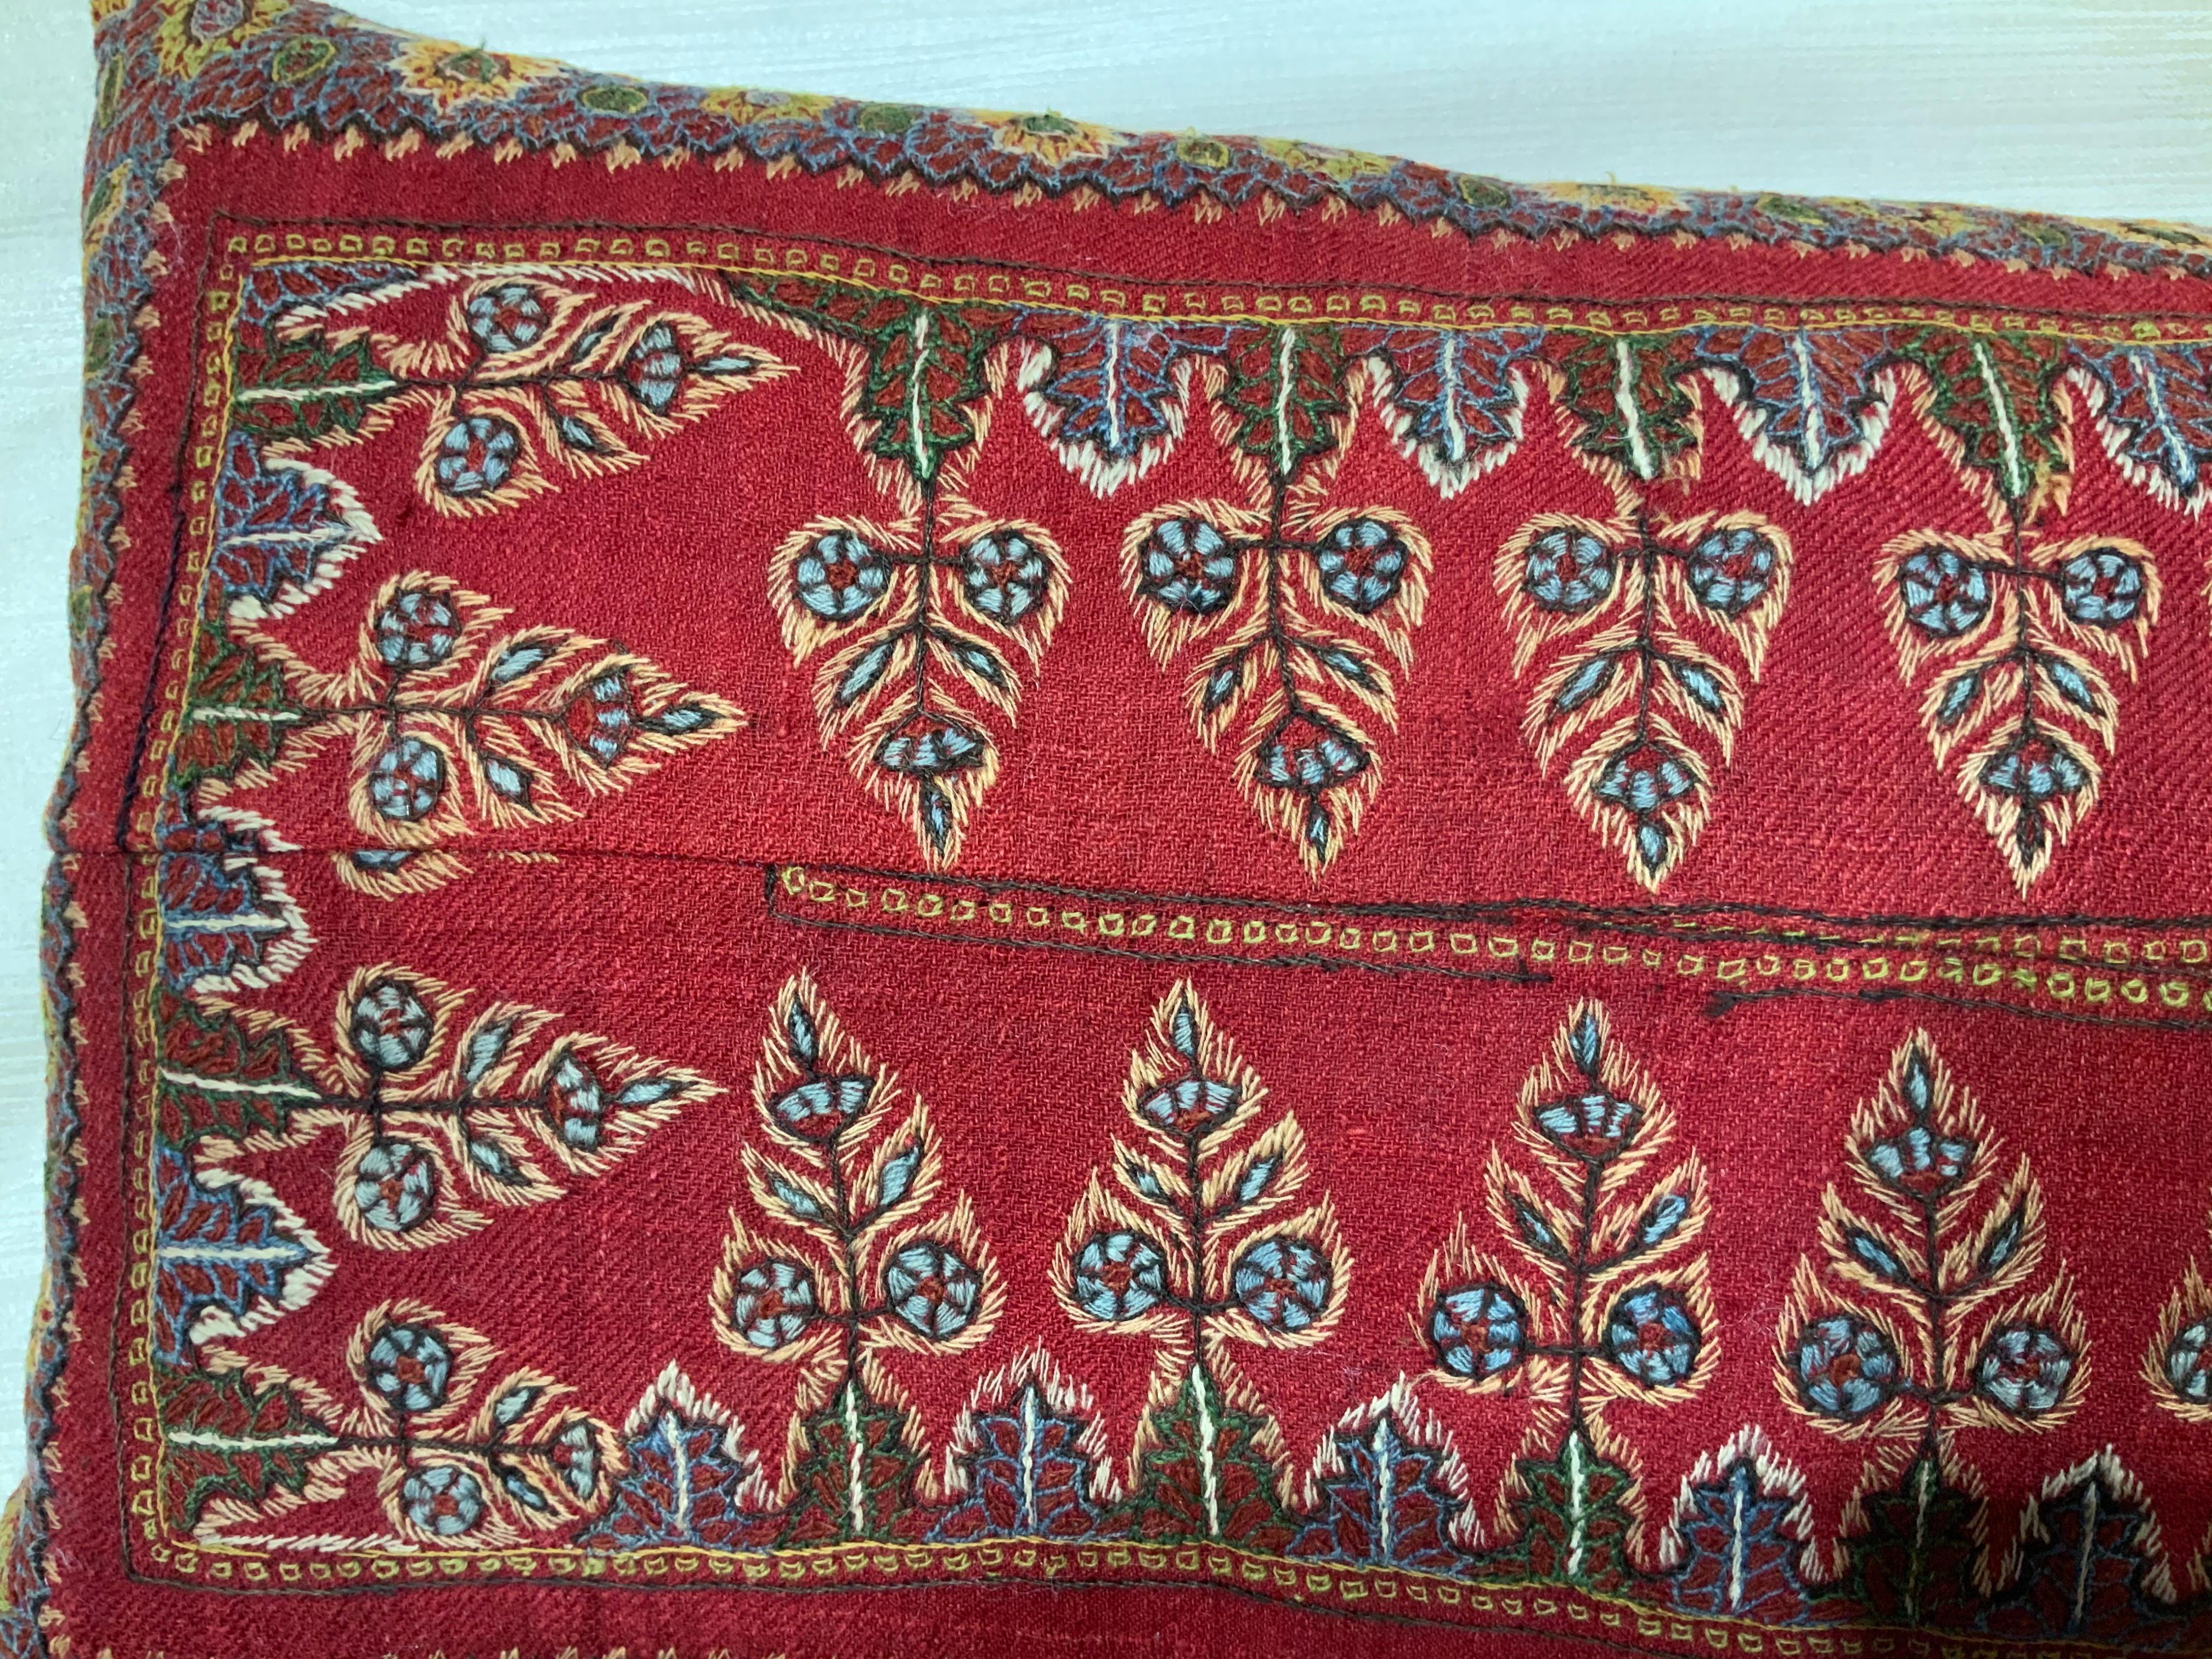 Beautiful hand embroidery front pillow made of Persian Kermonsha province antique textile.
Very detailed floral and vine motifs. Great horizontal pillow.
Frash insert.
Fine cotton backing.